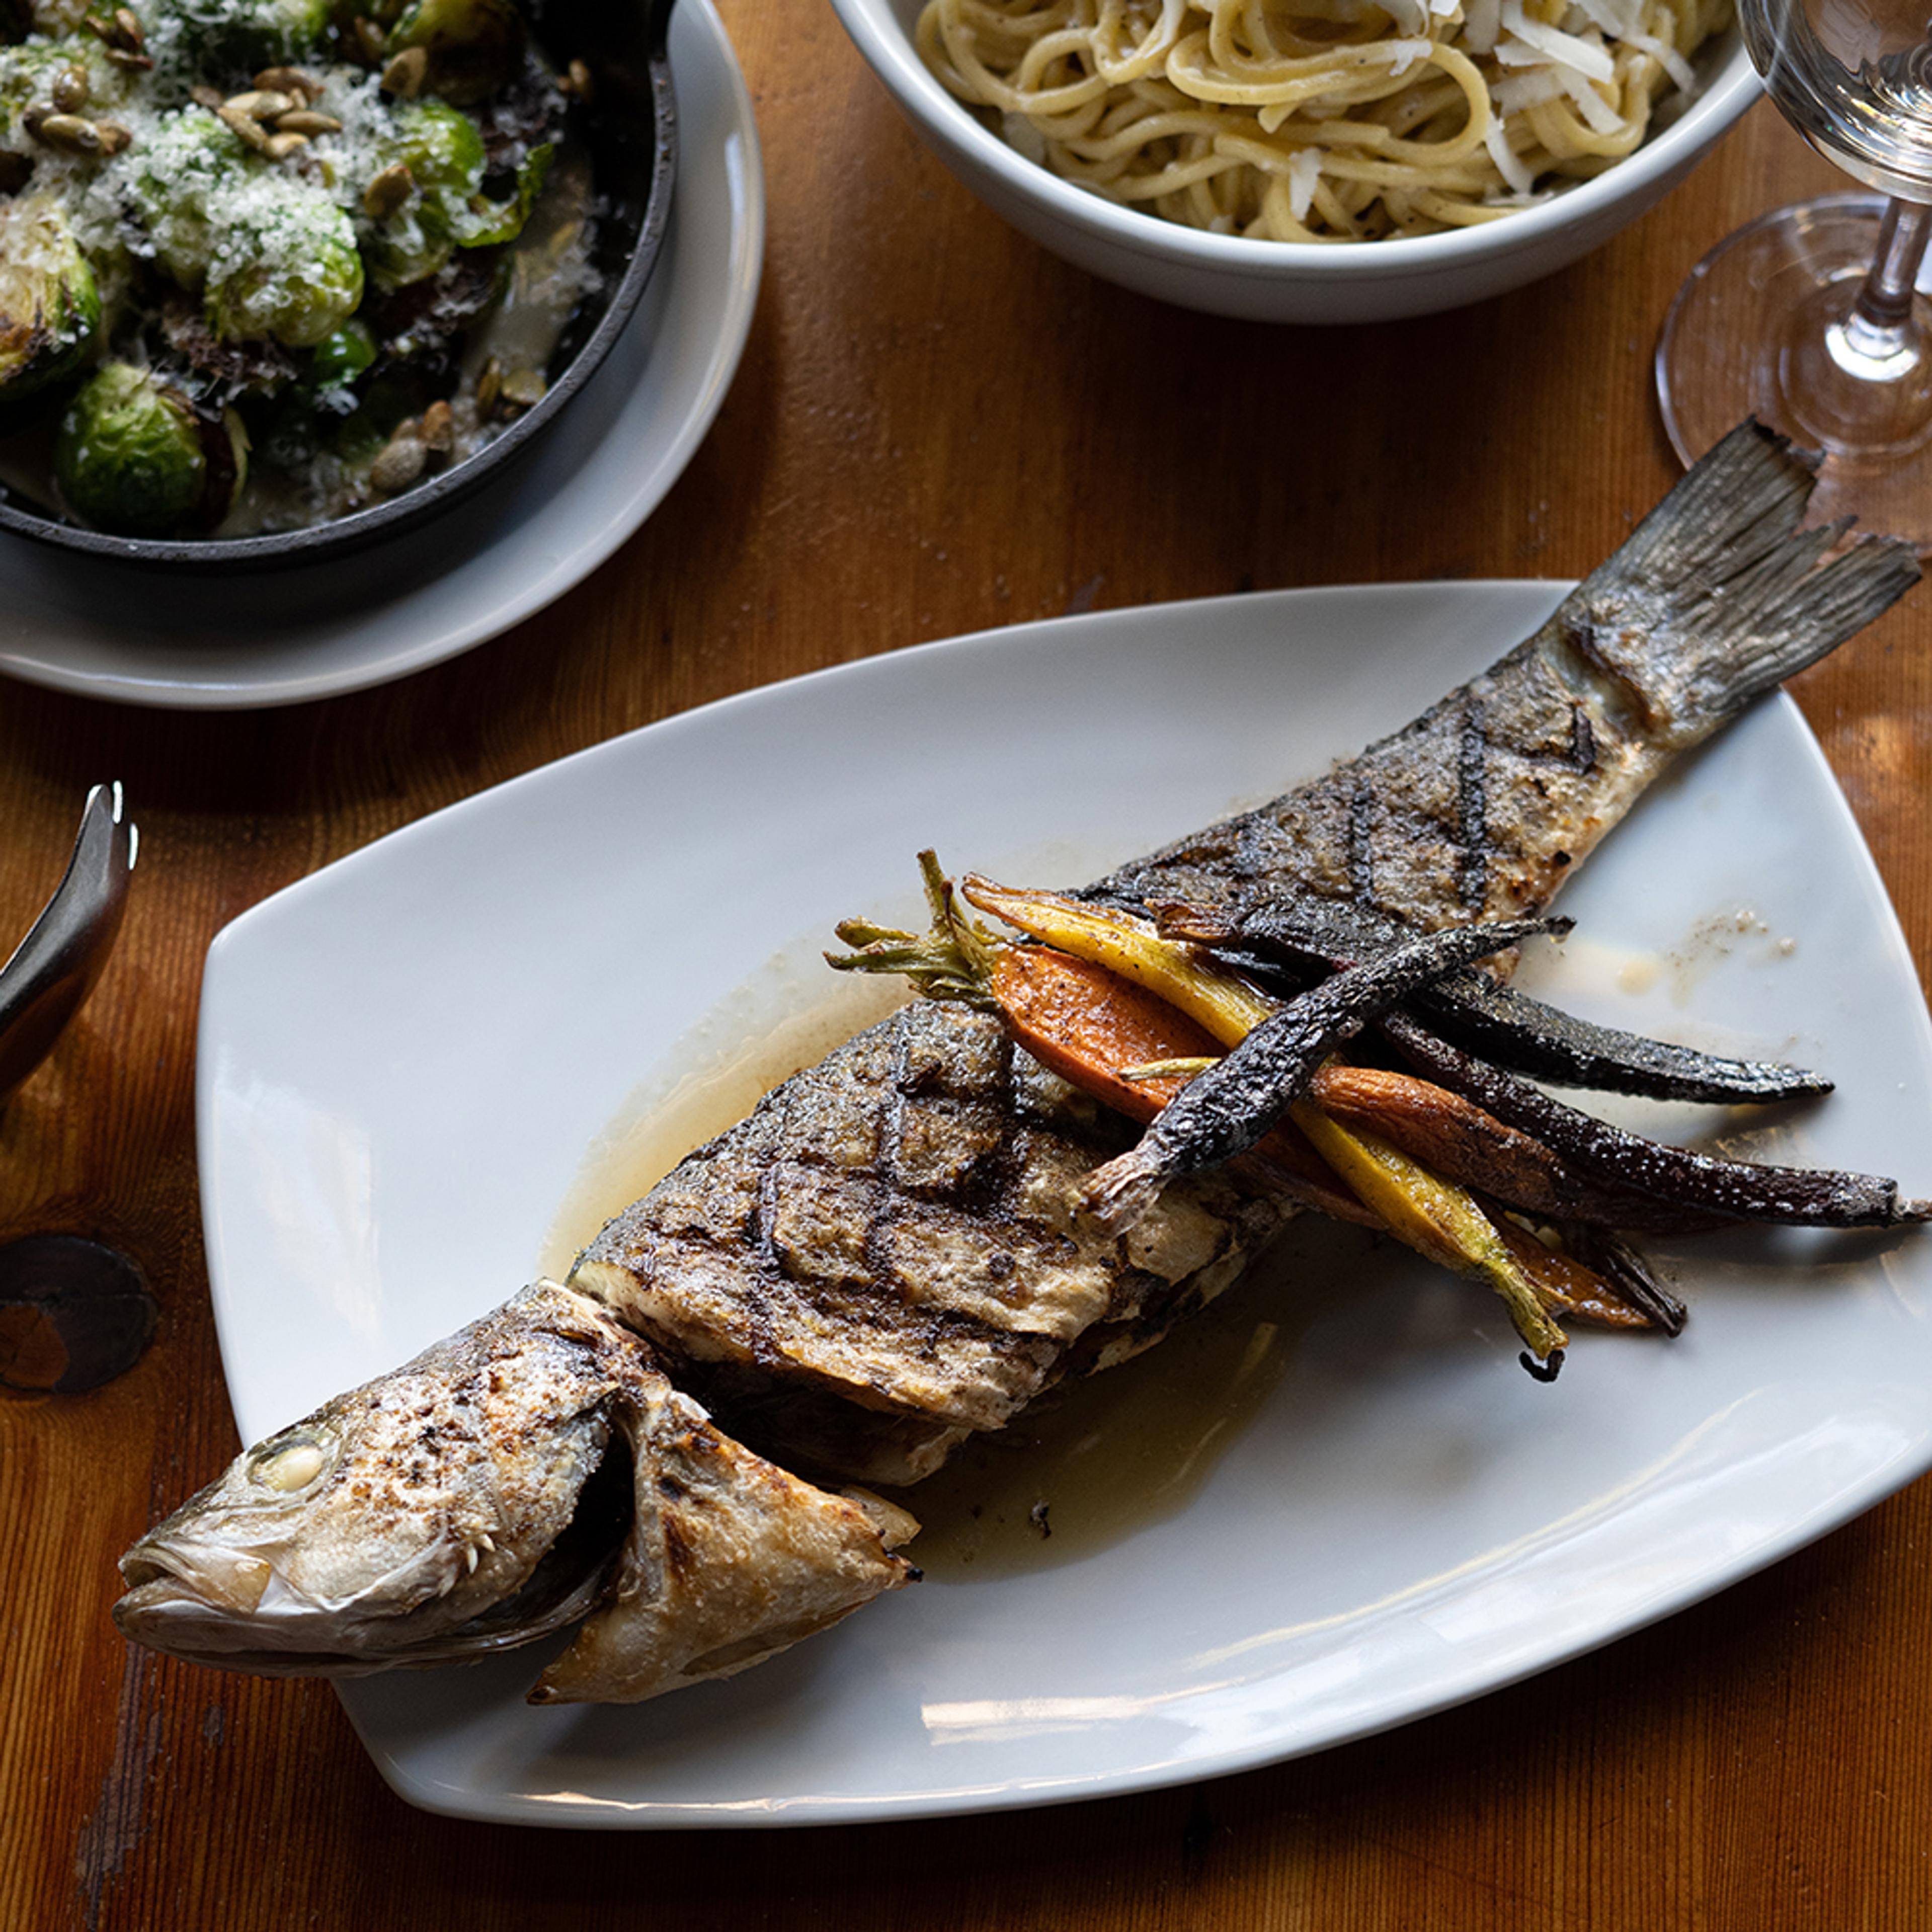 Grilled whole Branzino fish topped with roasted rainbow carrots